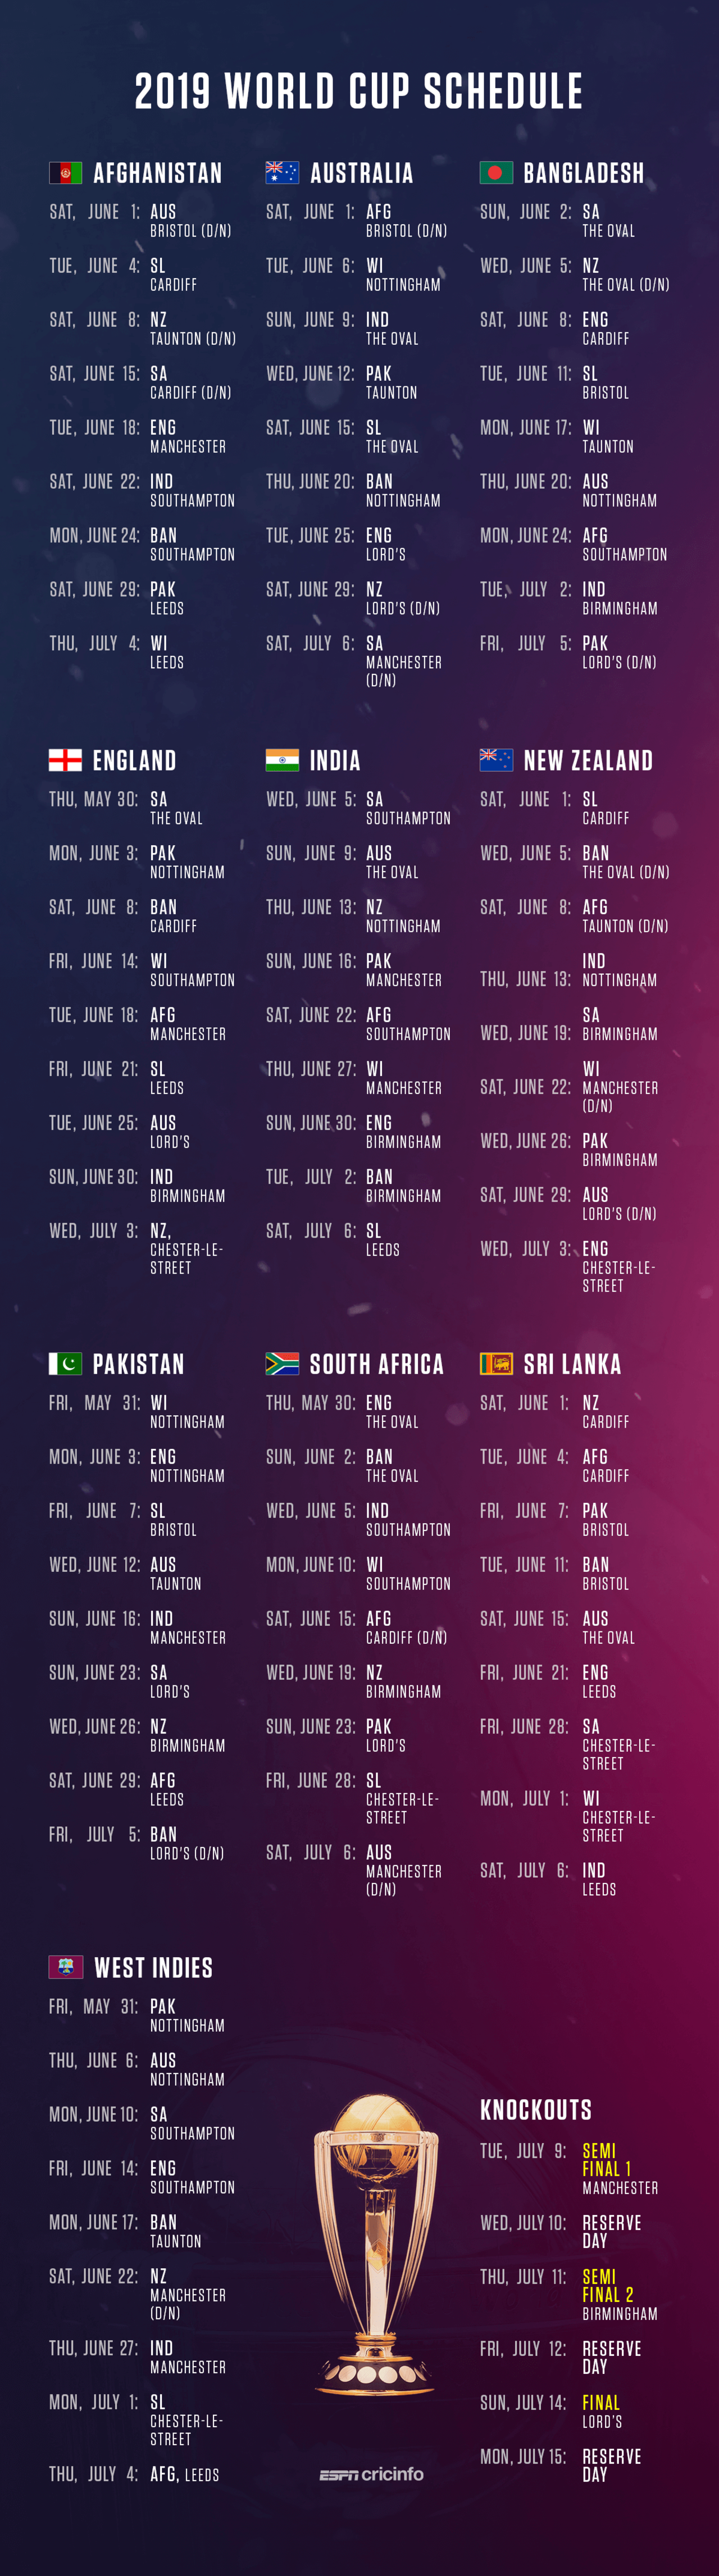 The schedule for the 2019 World Cup, April 26, 2018 